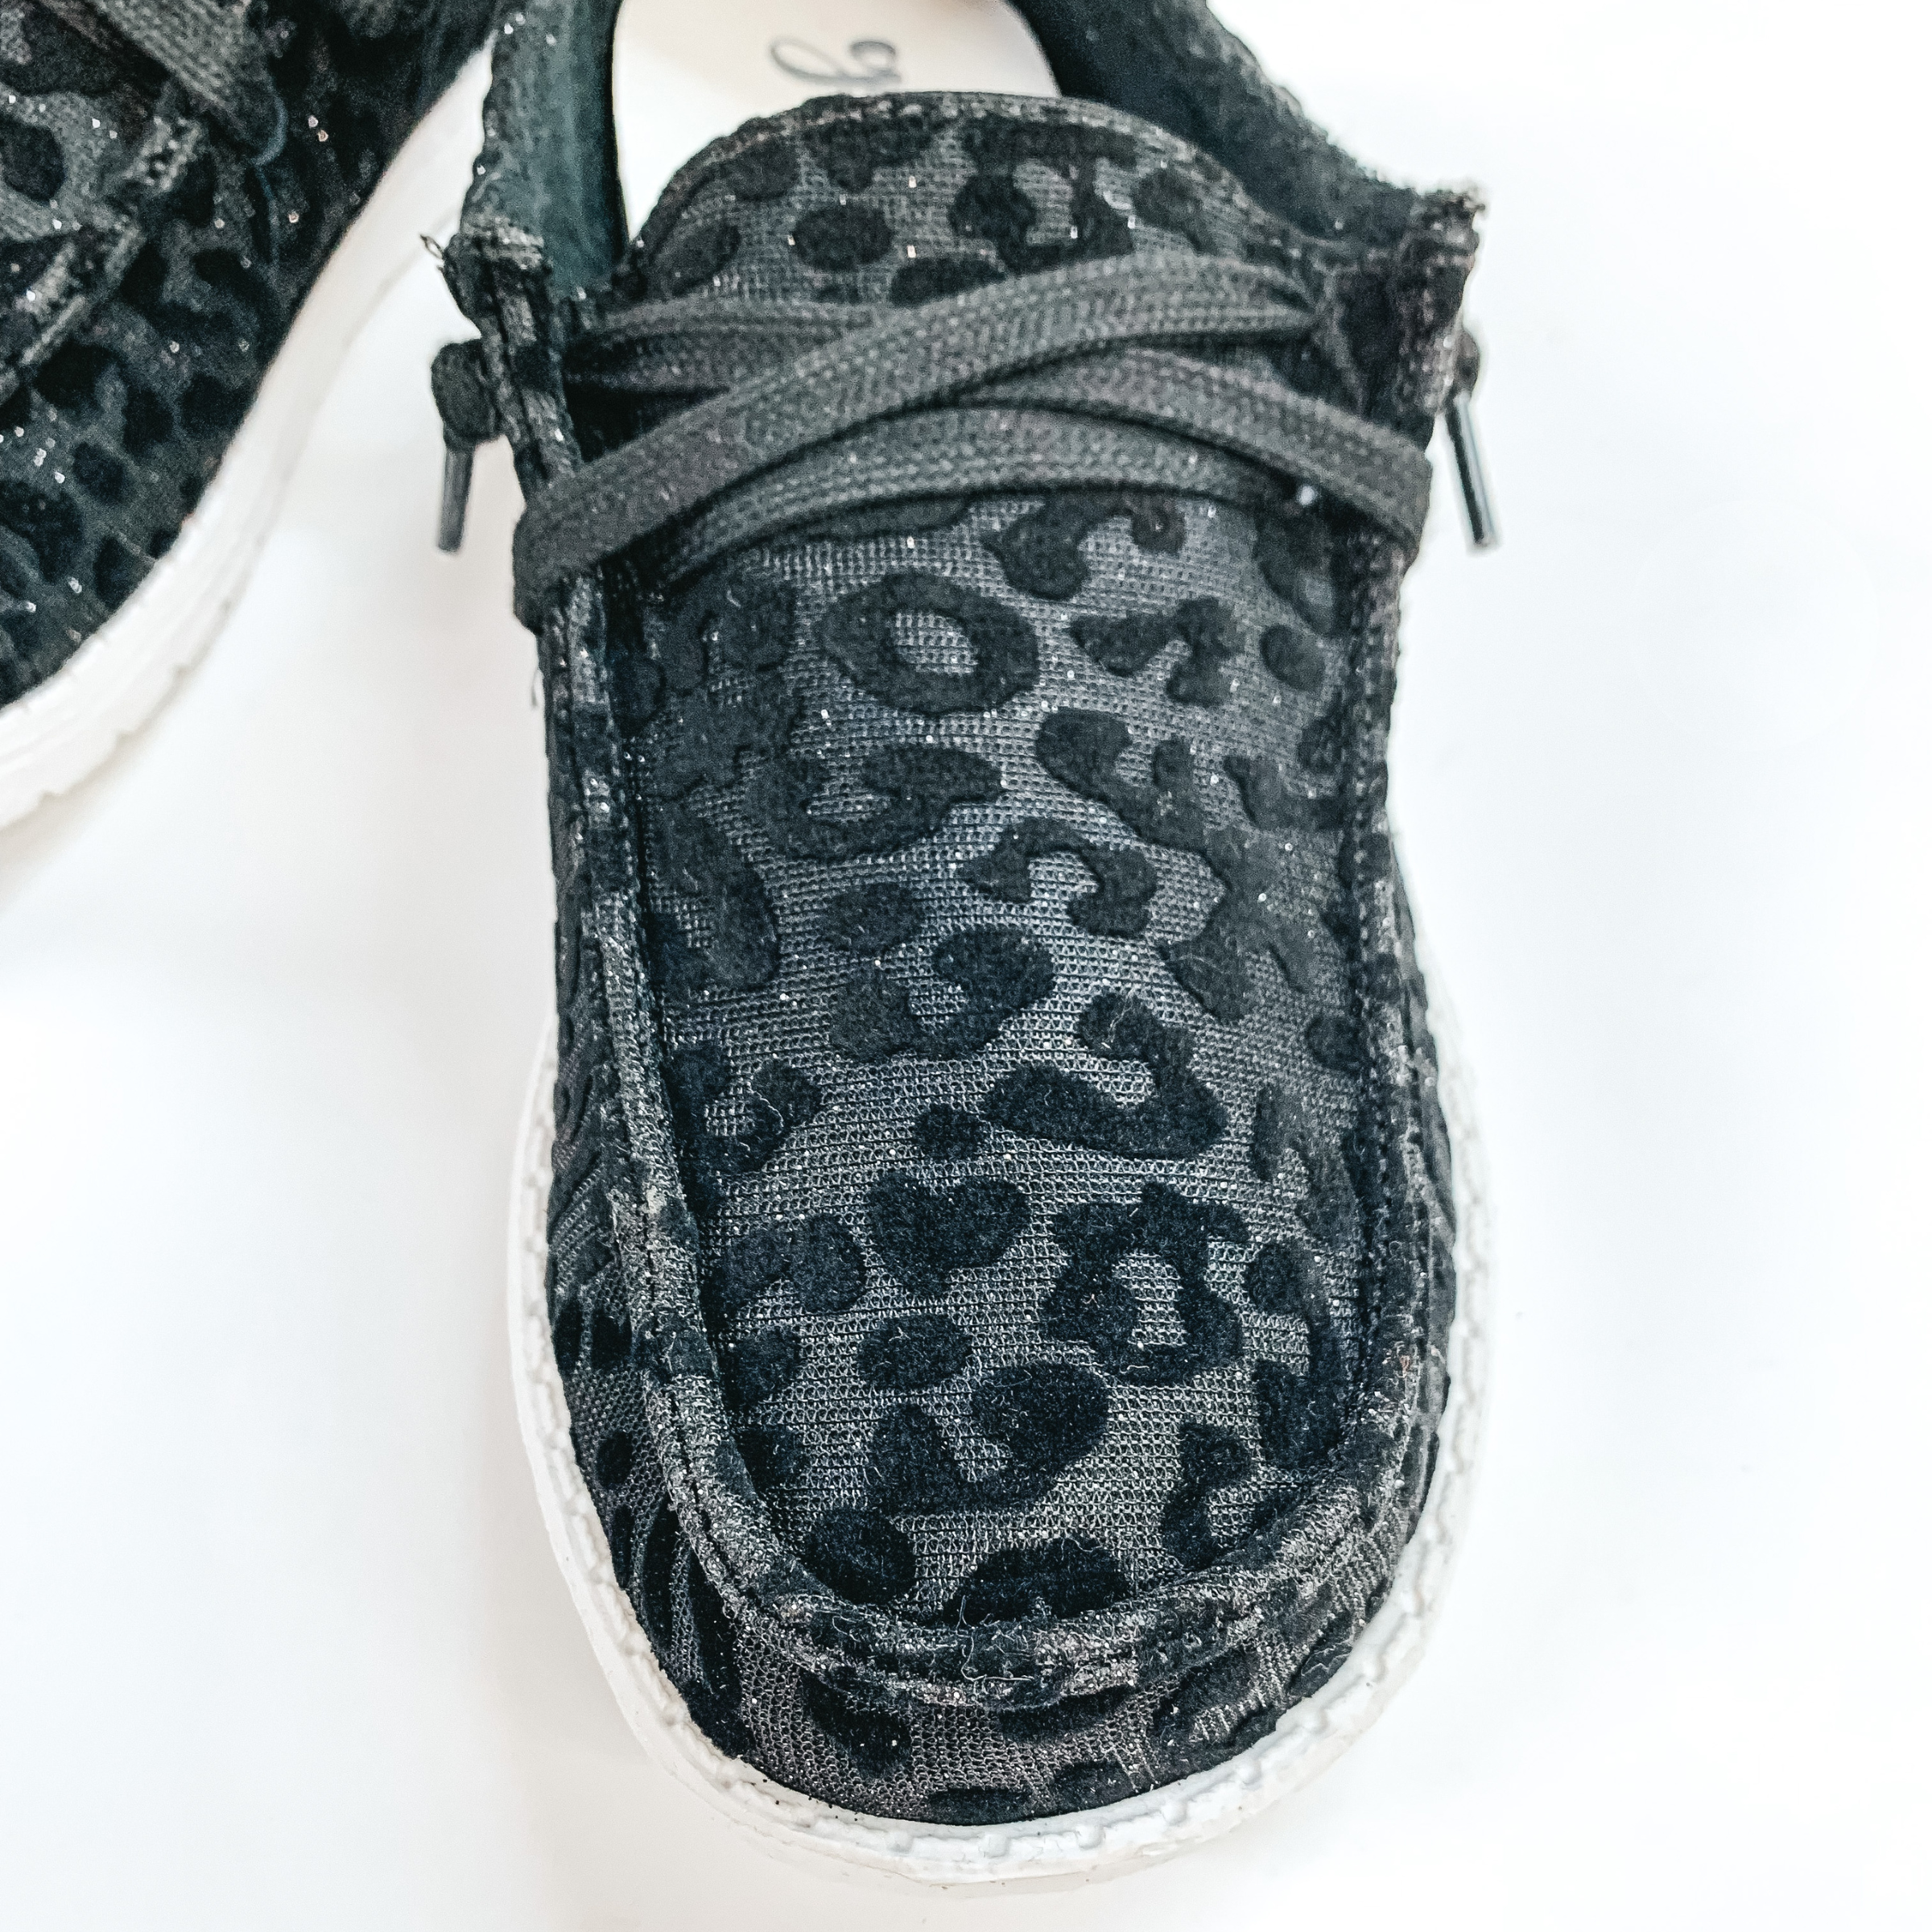 Very G | Have To Run Leopard Print Slip On Loafers with Laces in Black Glitter